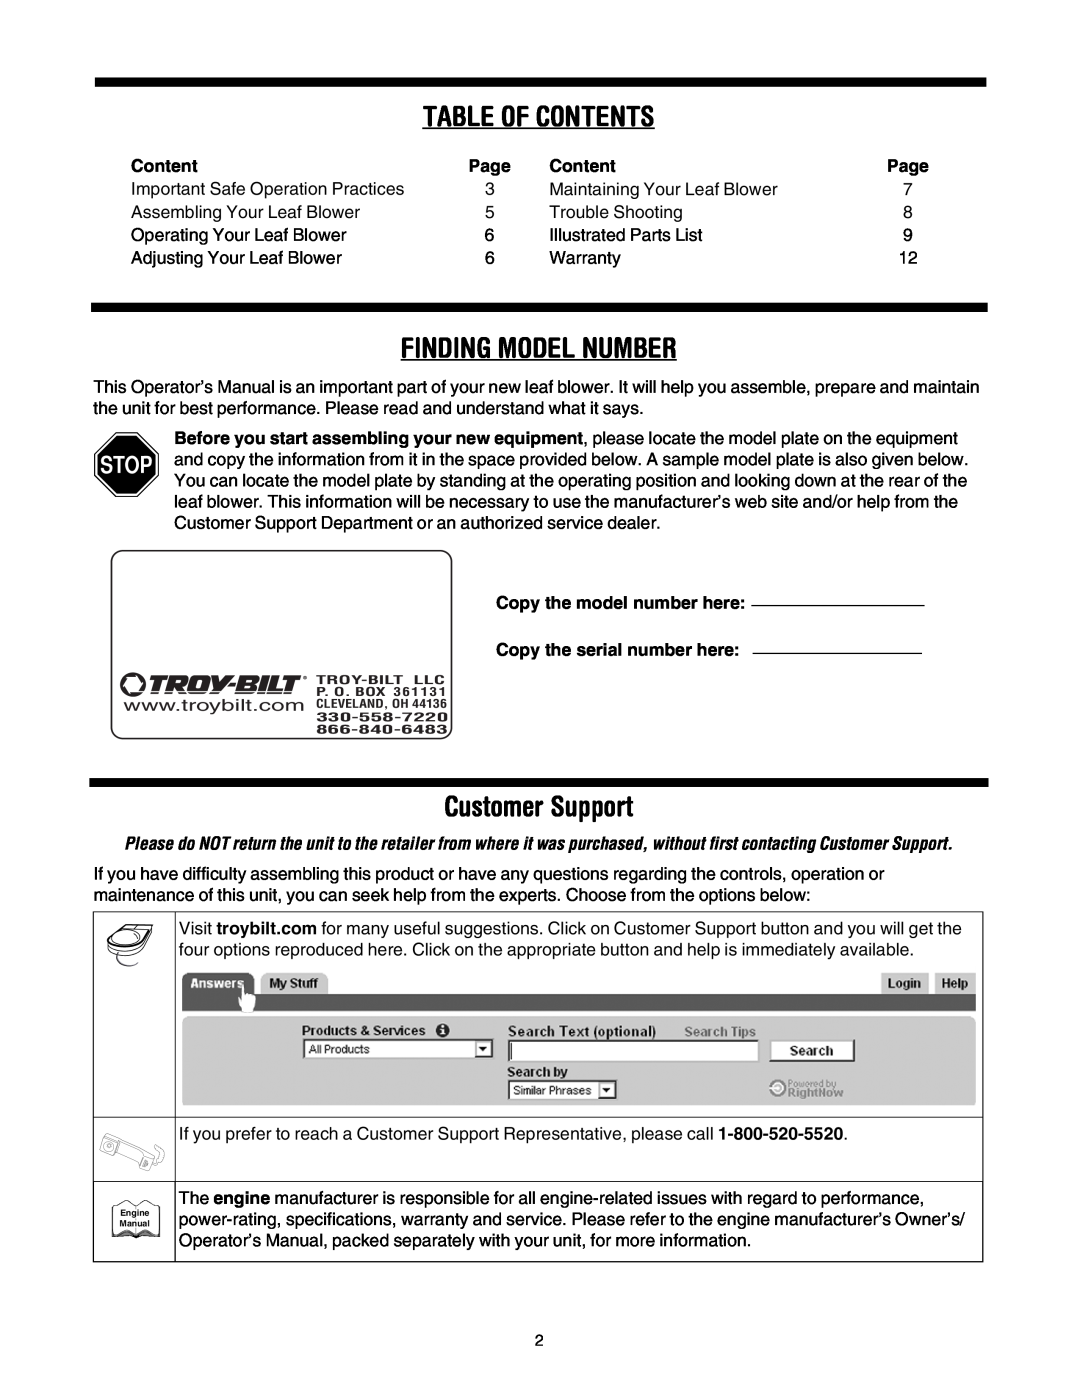 Troy-Bilt 657 warranty Table Of Contents, Finding Model Number, Customer Support, Copy the model number here 